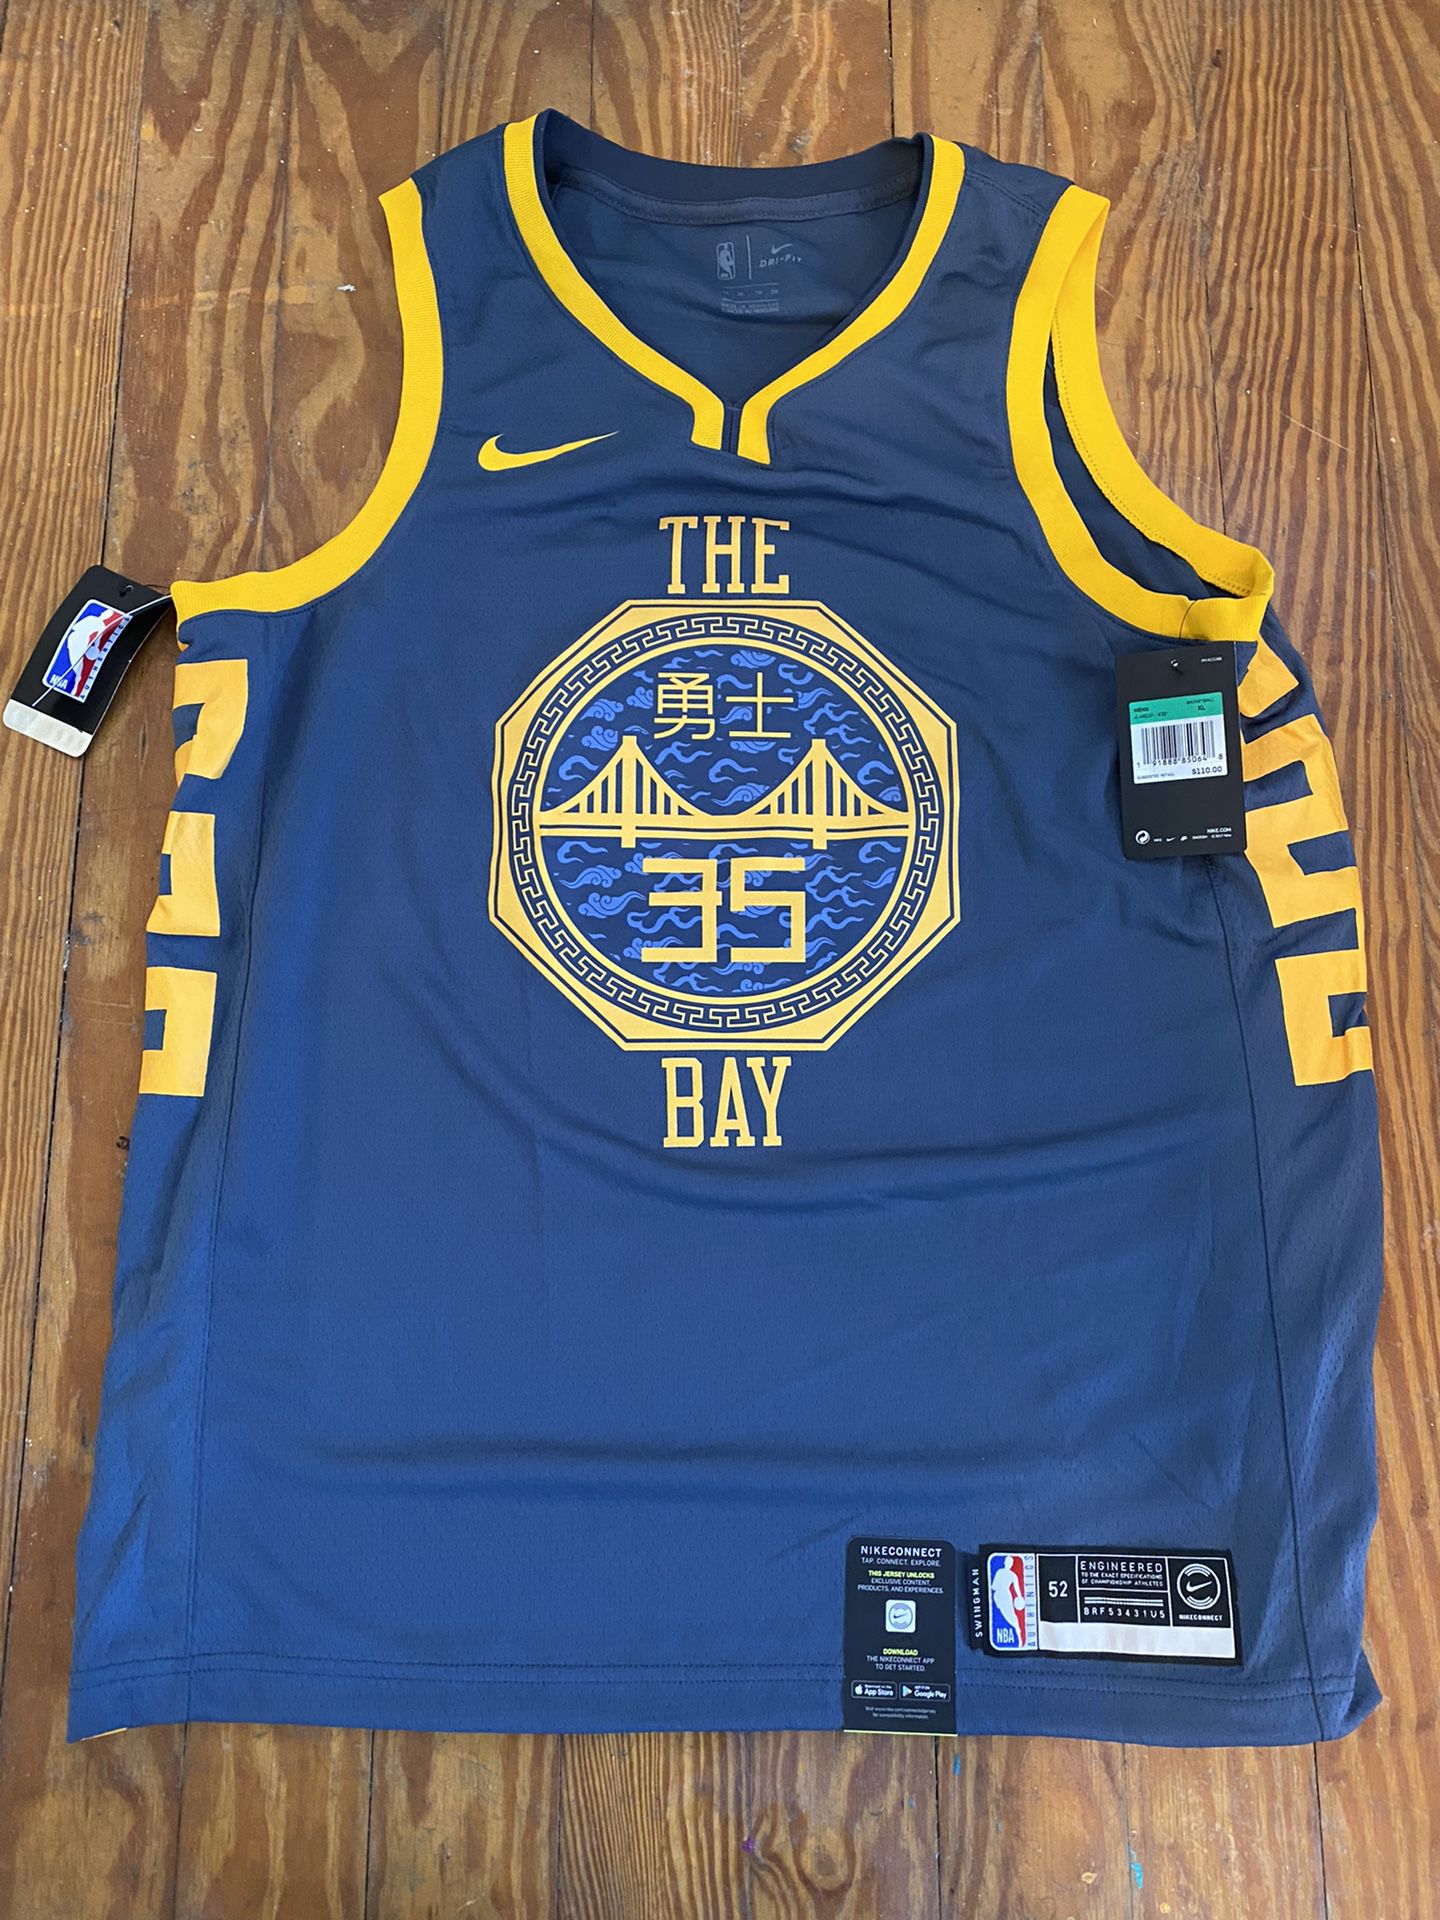 NEW W/ Tags! Kevin Durant Golden State Warriors Jersey